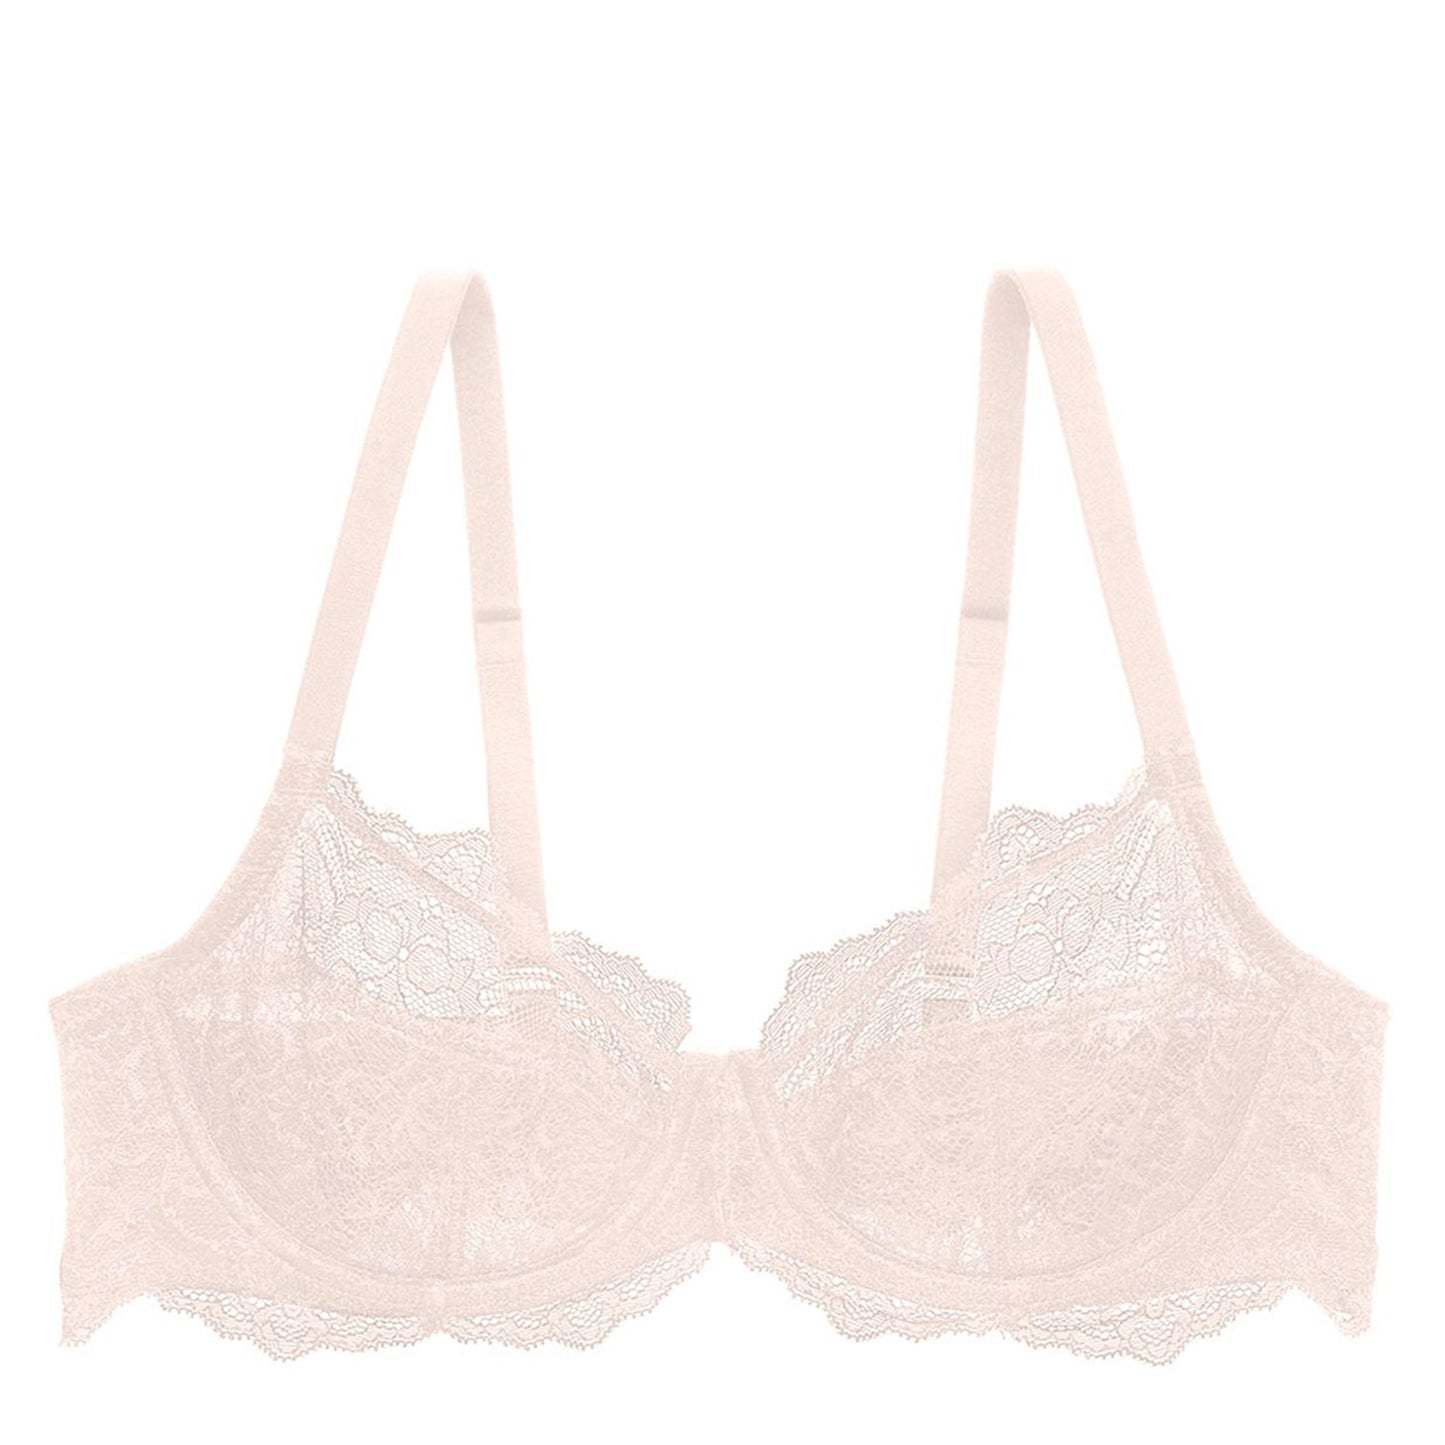 Dream Angels Wicked unlined bra offers both comfort and lift